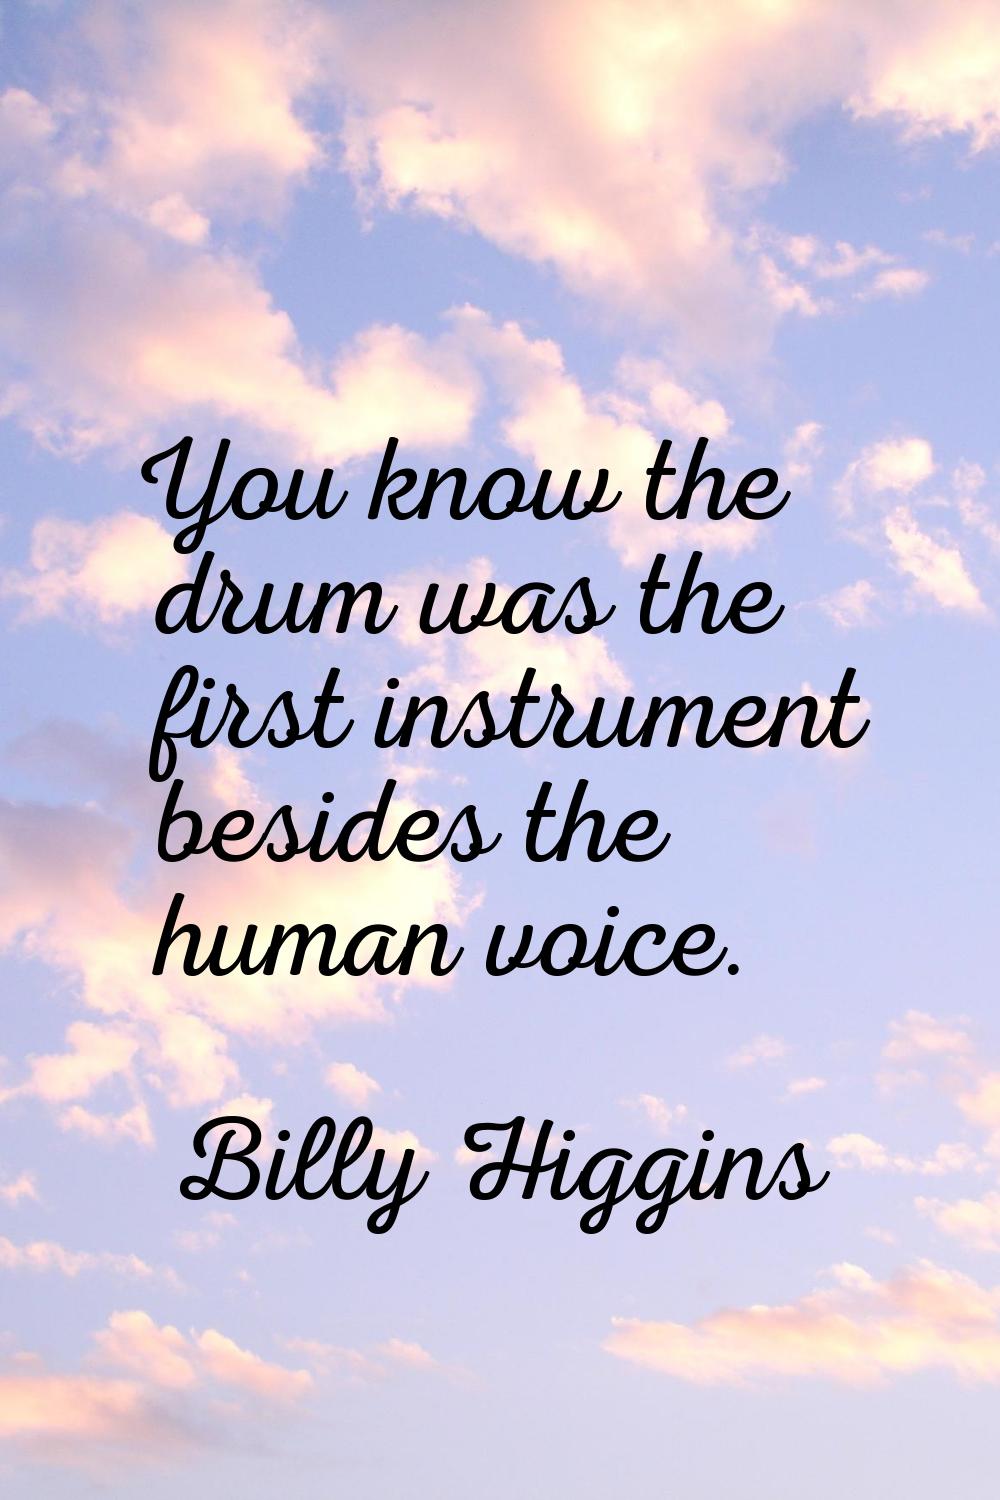 You know the drum was the first instrument besides the human voice.